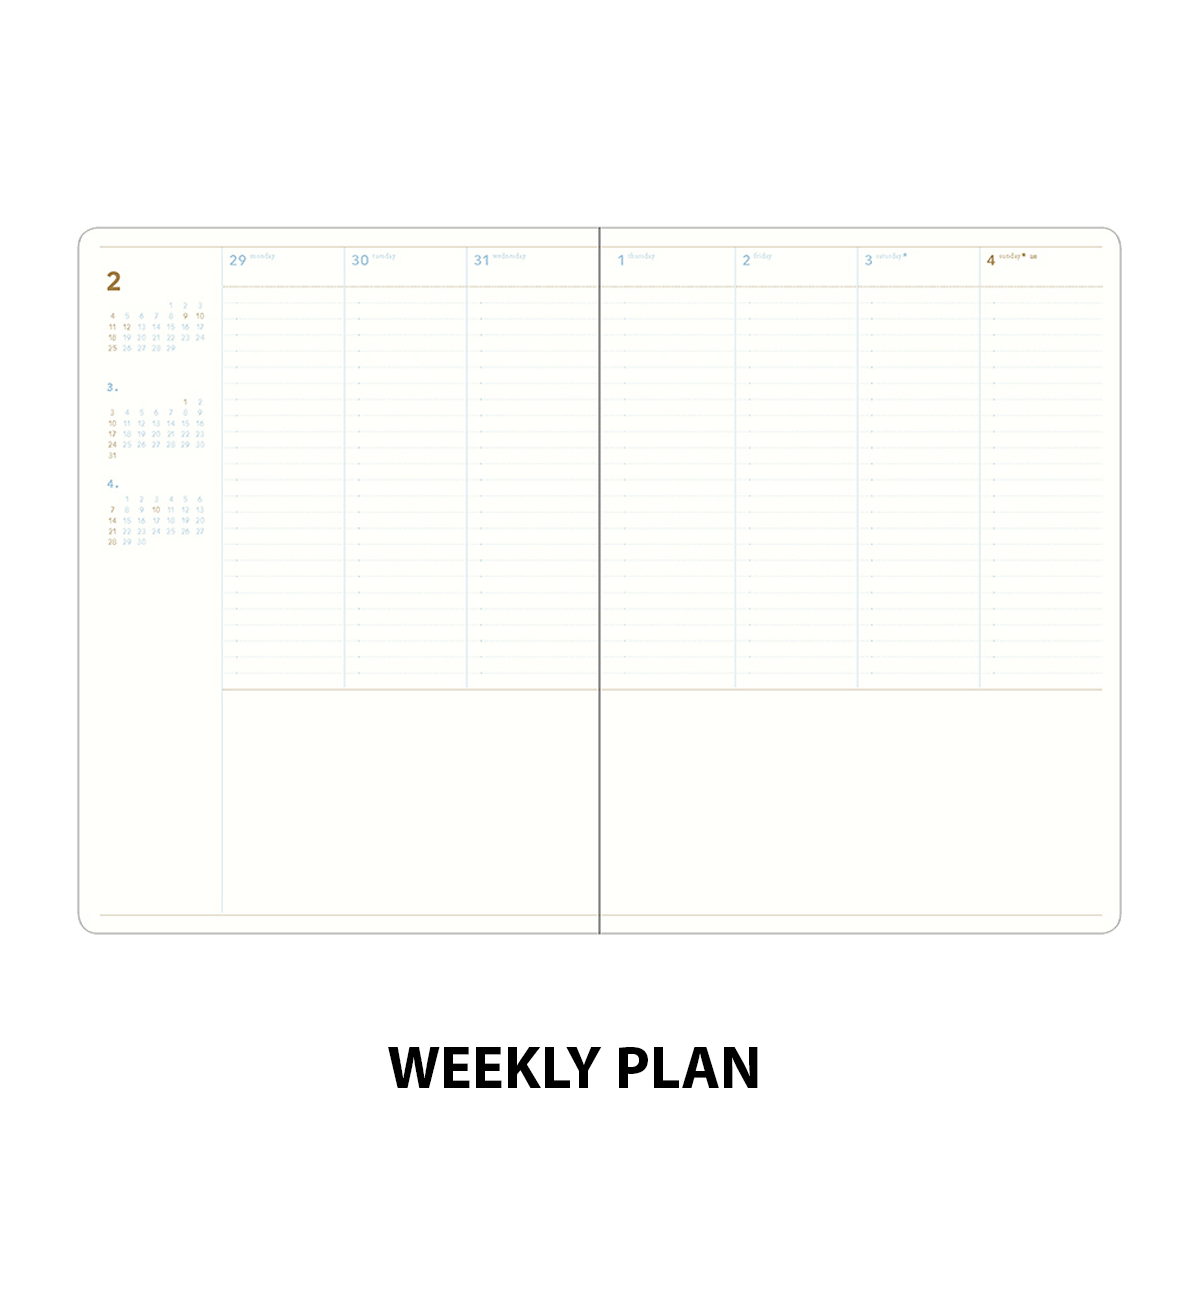 2024 Professional A4 Plus Weekly Planner